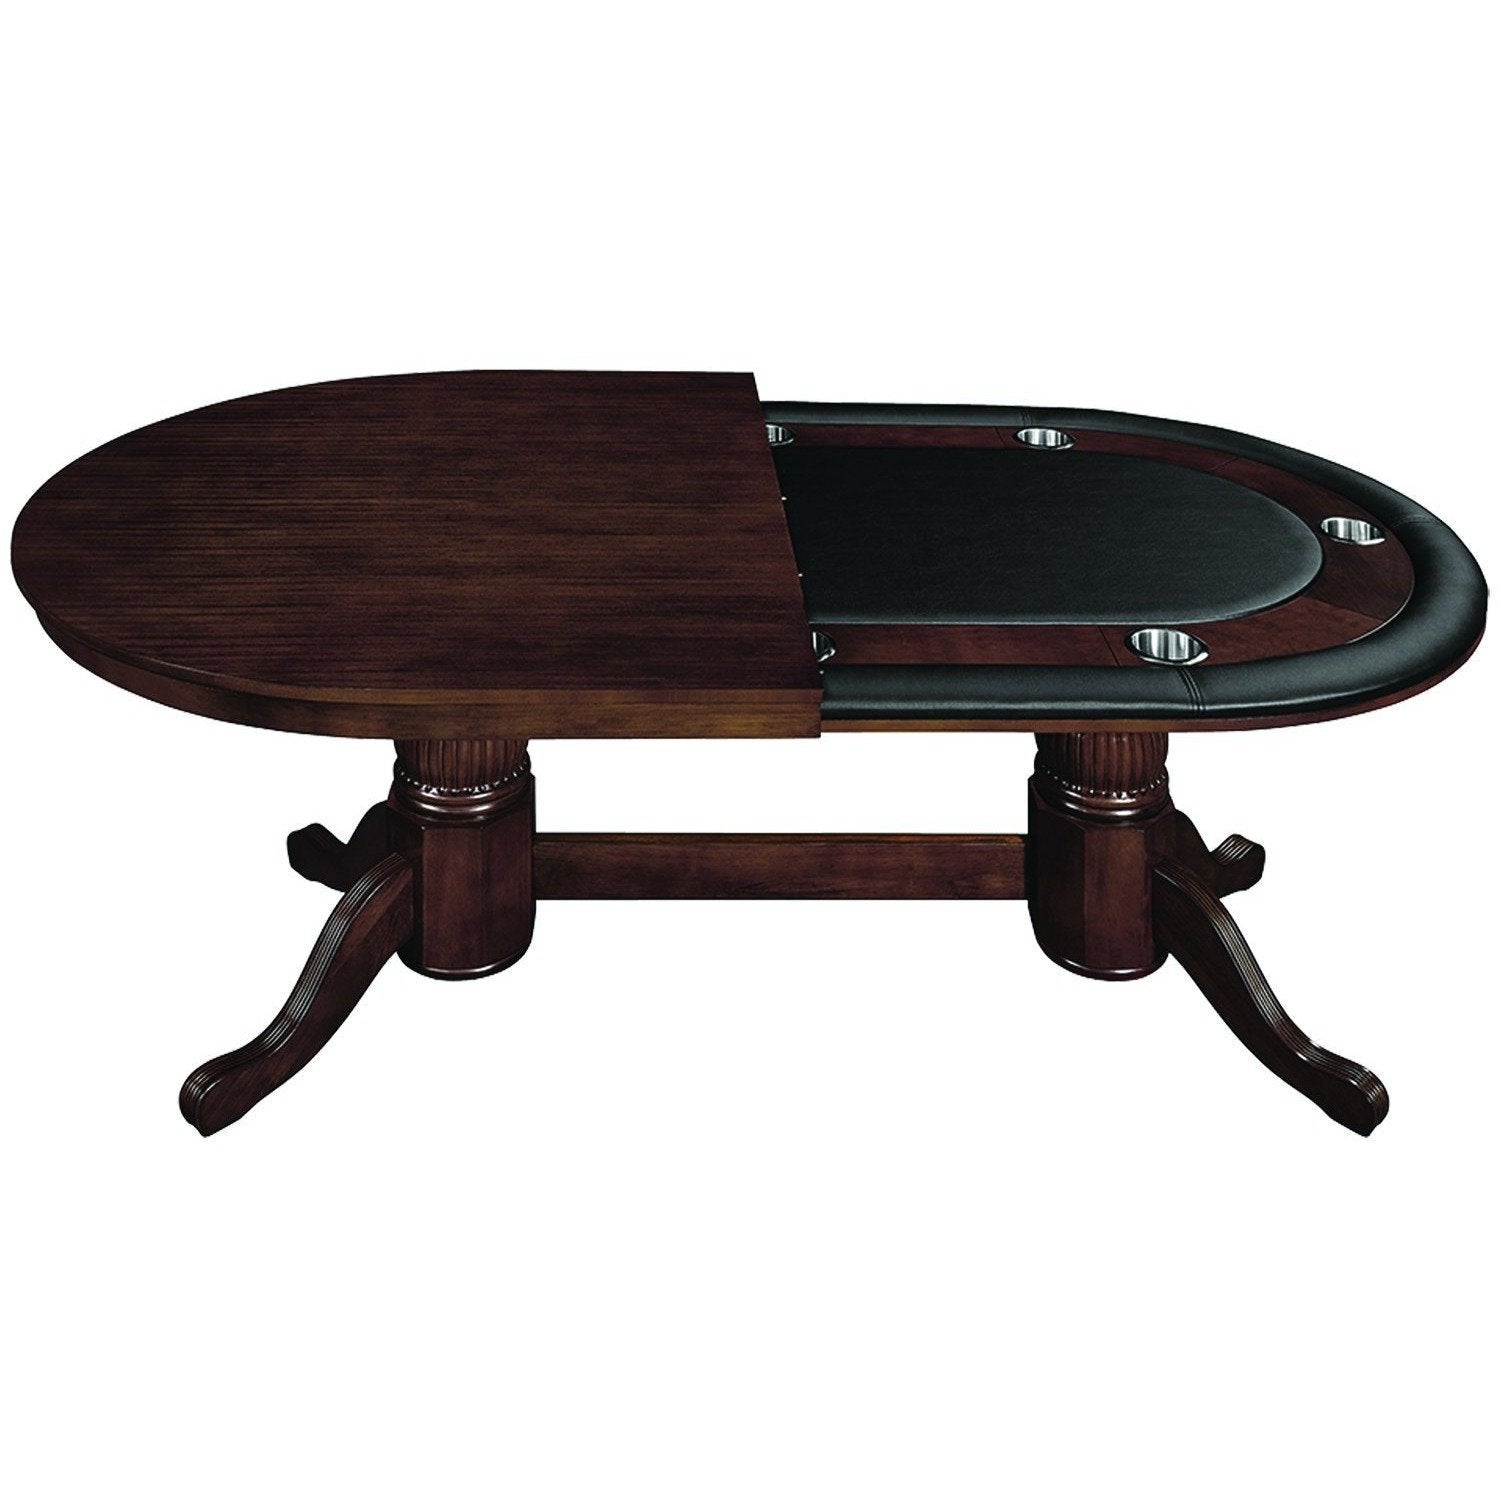 ram game room gtbl84-wt texas holdem game table Cappuccino with dining top half cover